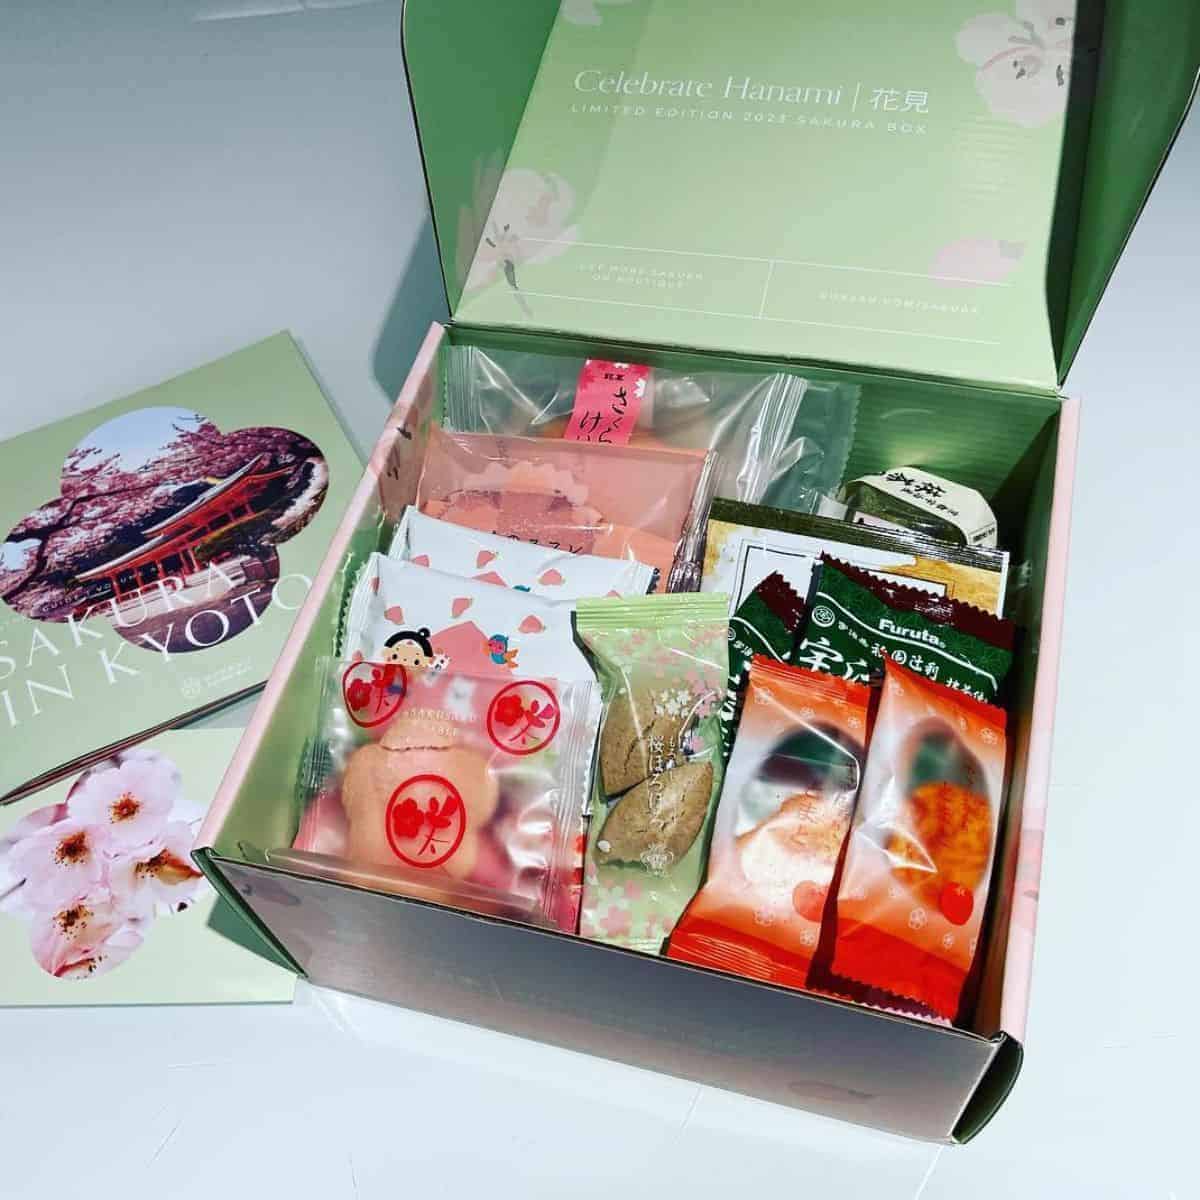 Bokksu in a green themed box filled with sweet treats